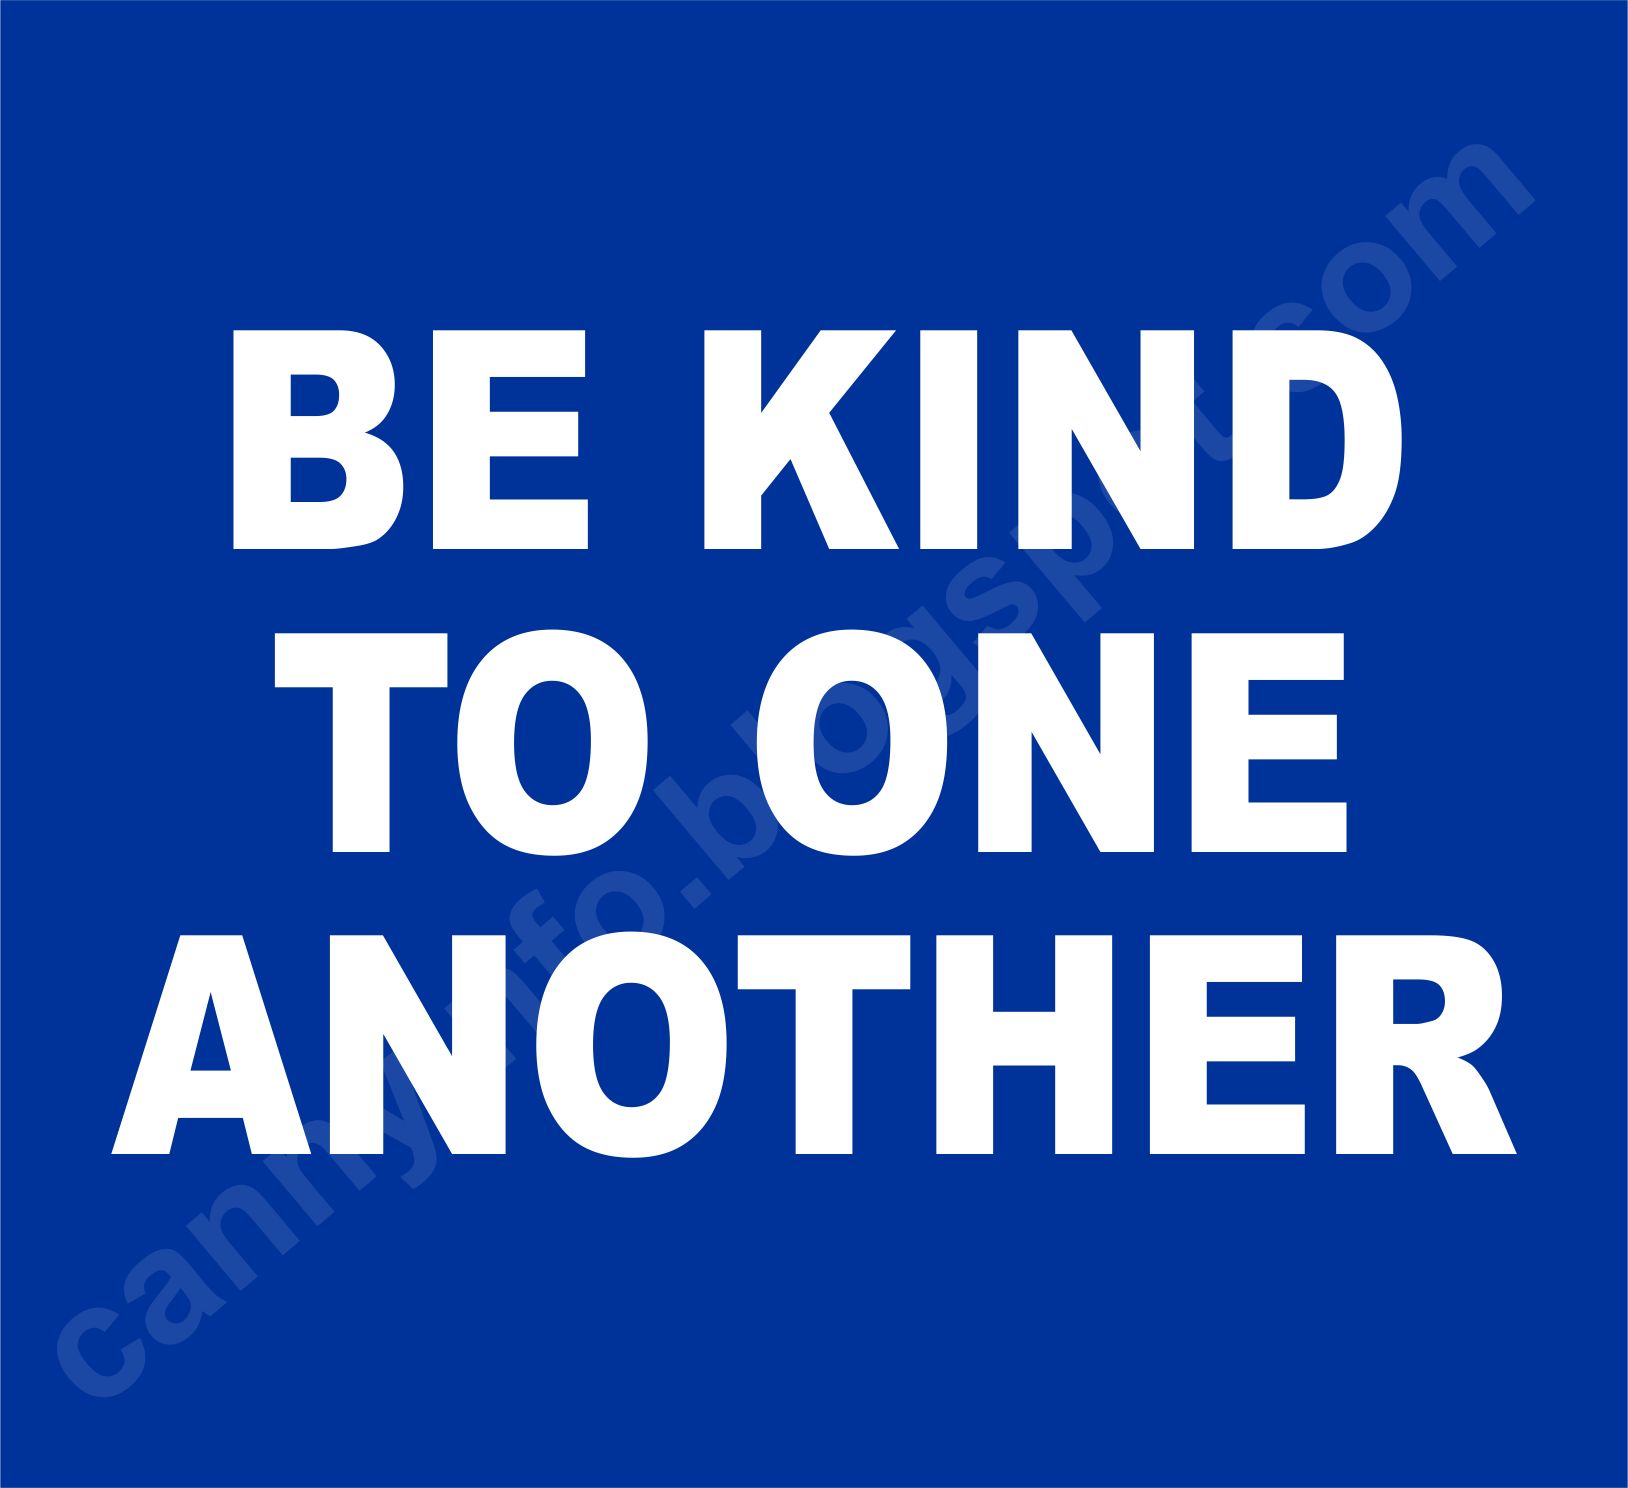 HOW TO BE KIND WITH ONE ANOTHER, FIND OUT.